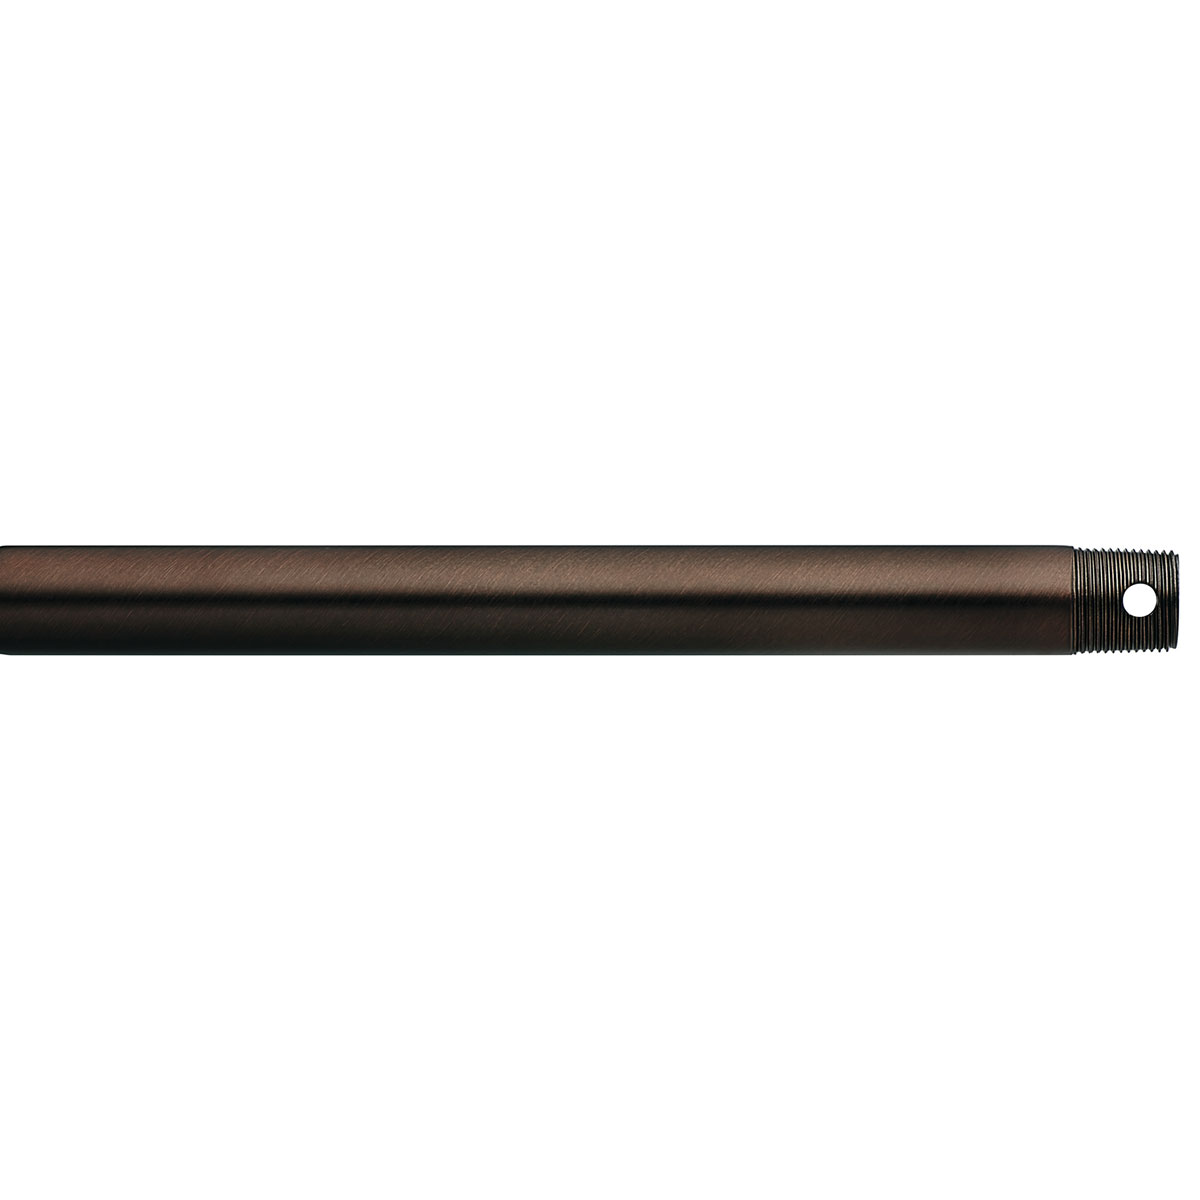 36 inch fan downrod (1 inch O.D.) suggested for 12 foot ceilings in Oil Brushed Bronze